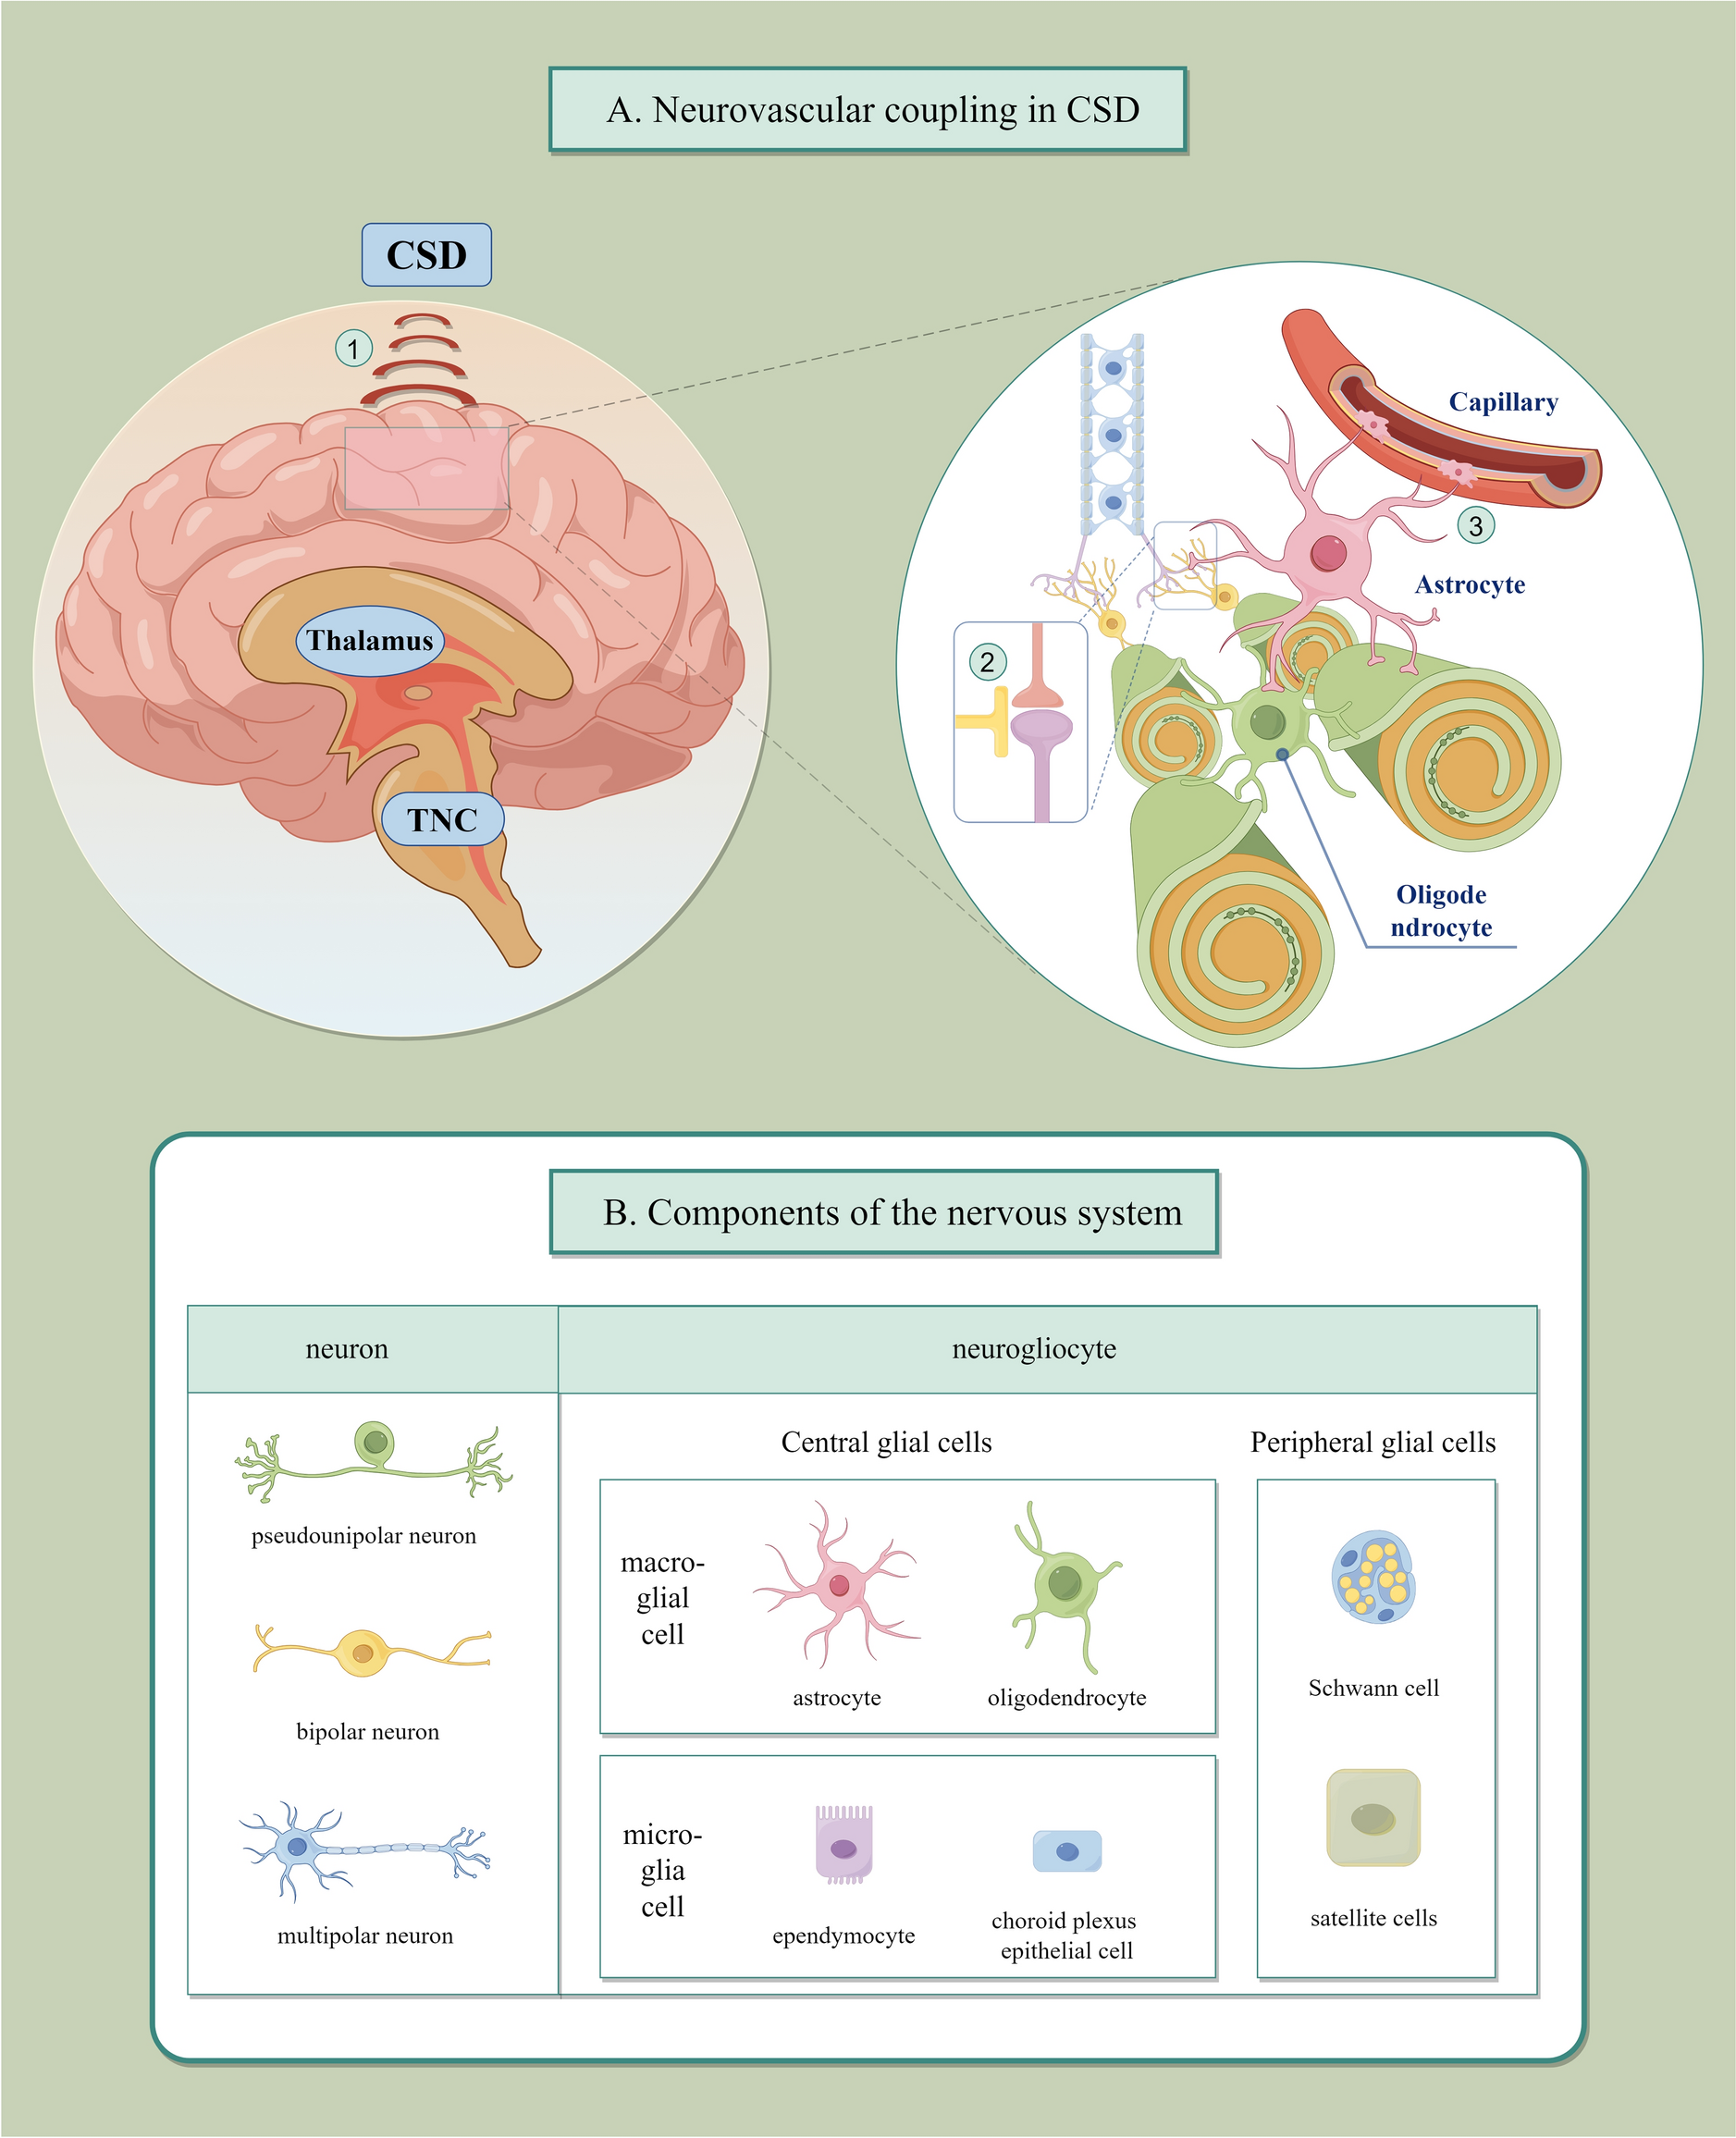 The Role of Astrocytes in Migraine with Cortical Spreading Depression: Protagonists or Bystanders? A Narrative Review